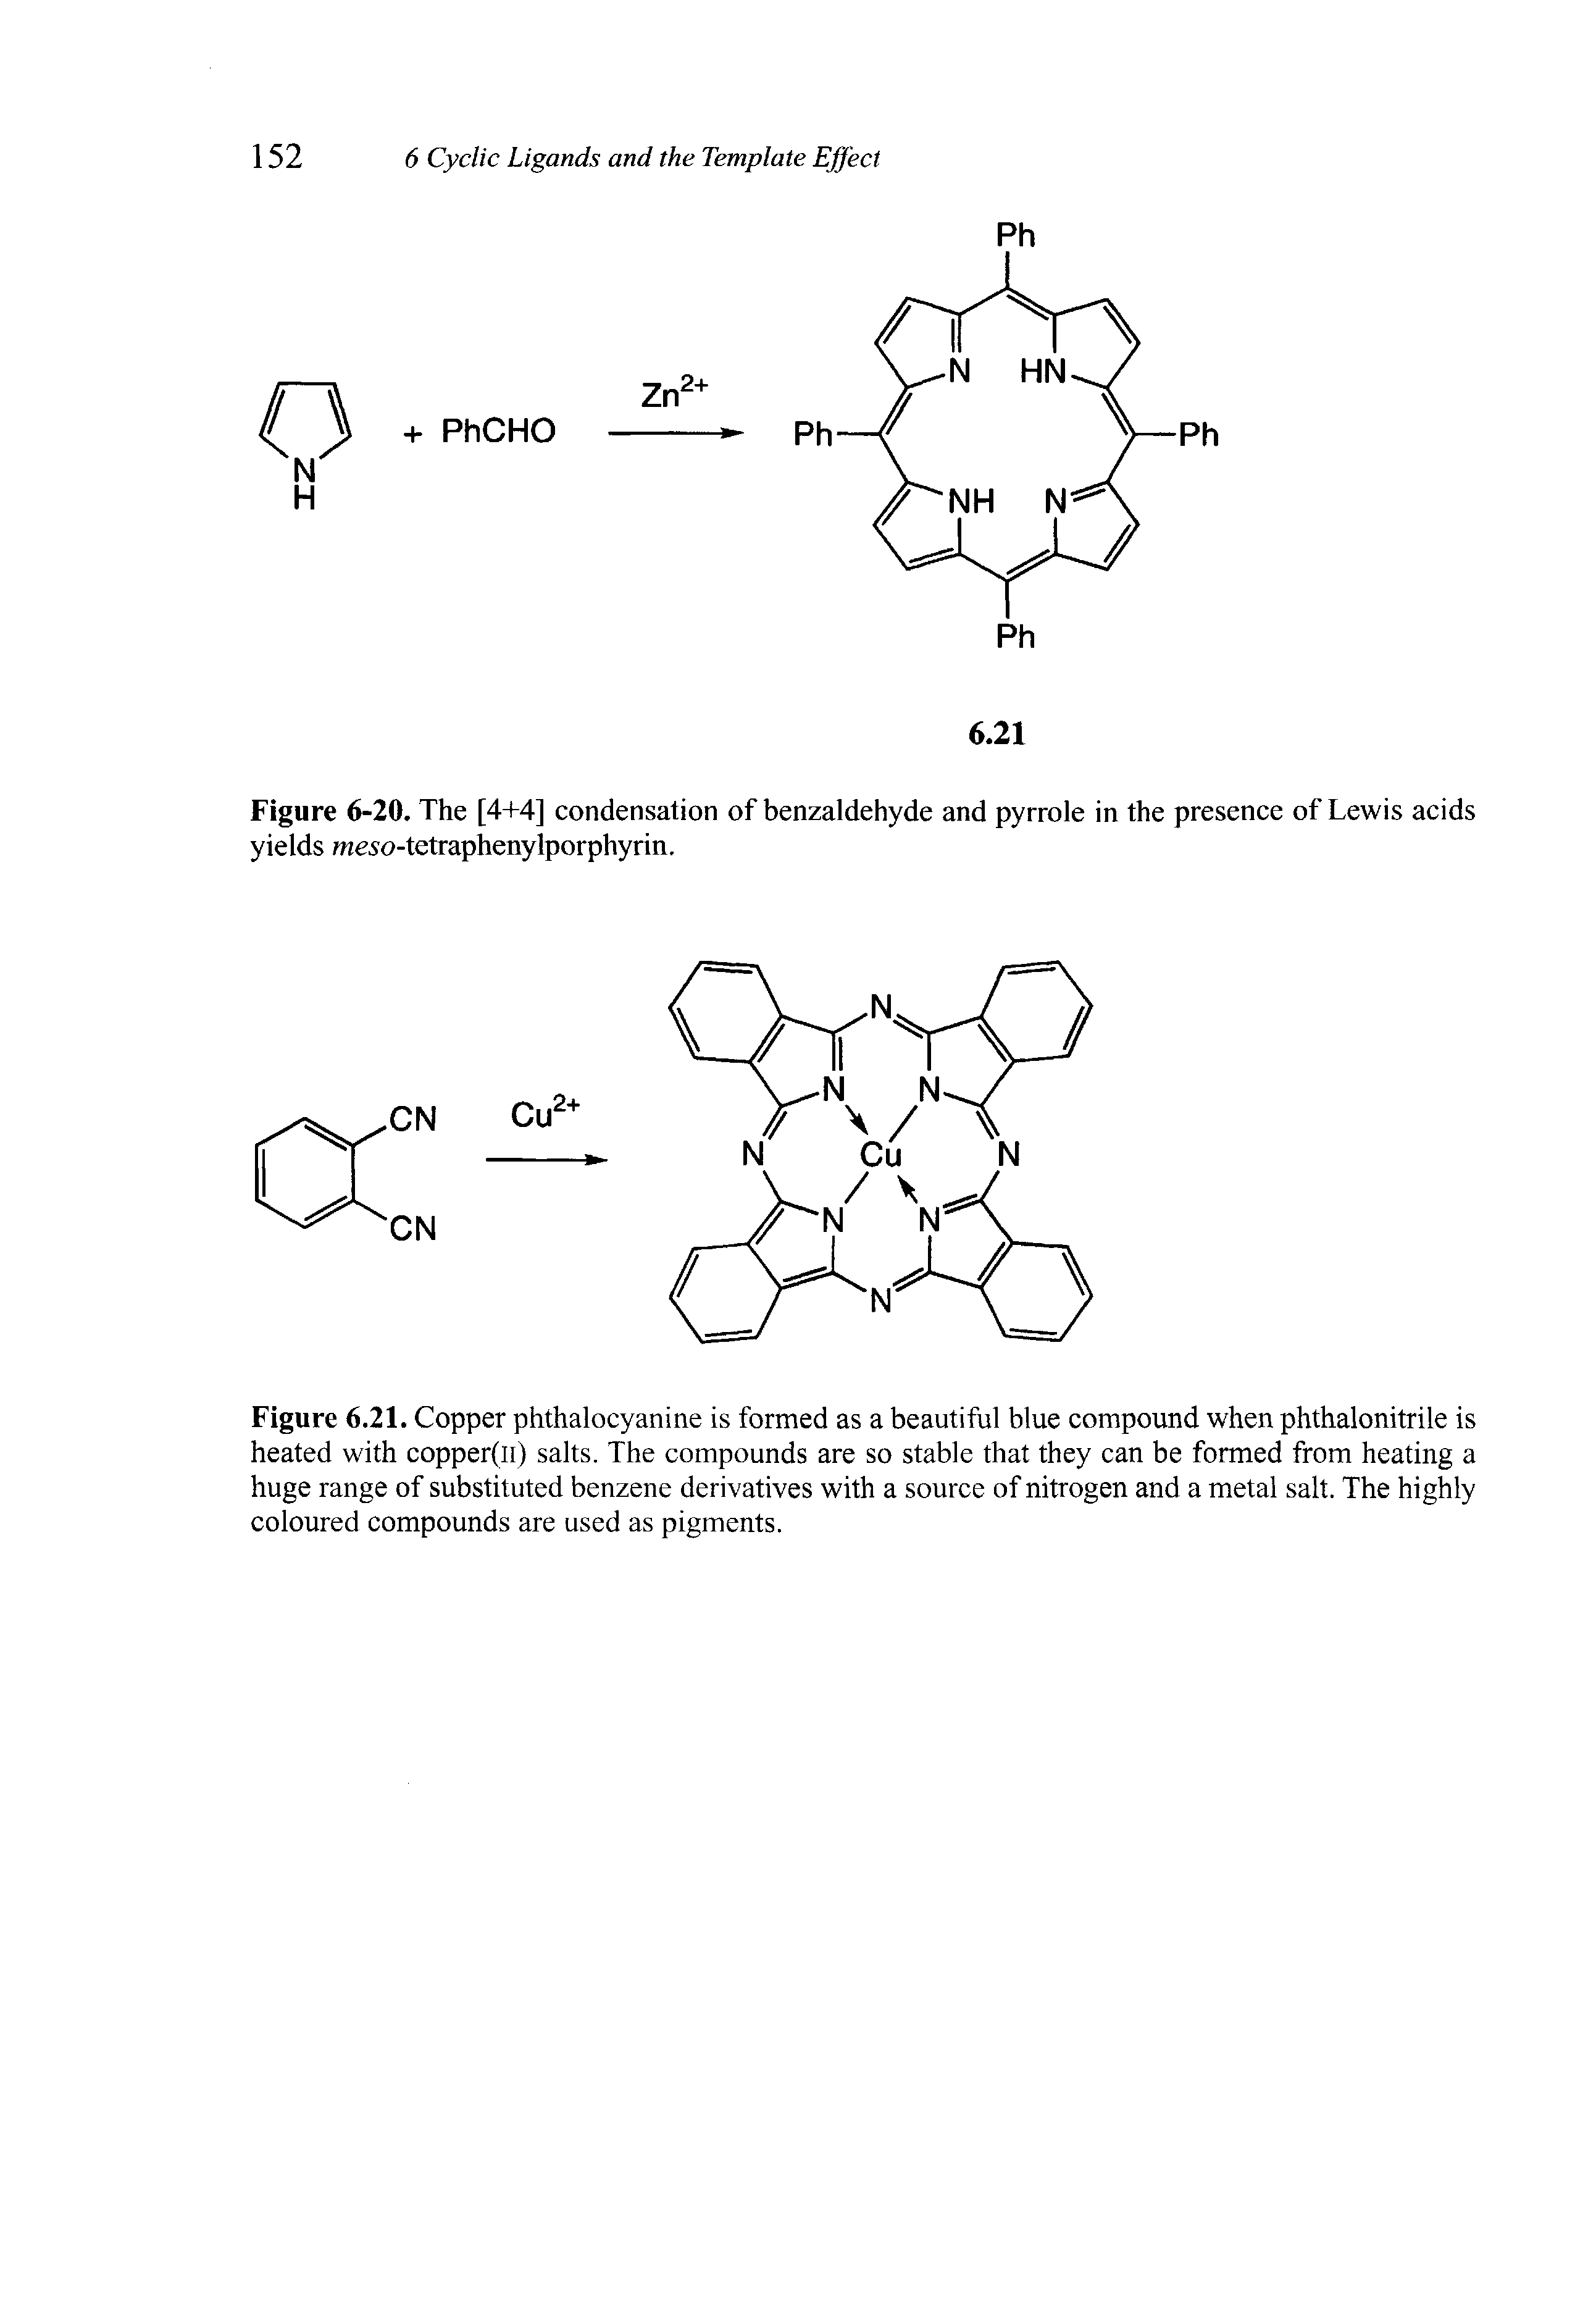 Figure 6-20. The [4+4] condensation of benzaldehyde and pyrrole in the presence of Lewis acids yields meso-tetraphenylporphyrin.